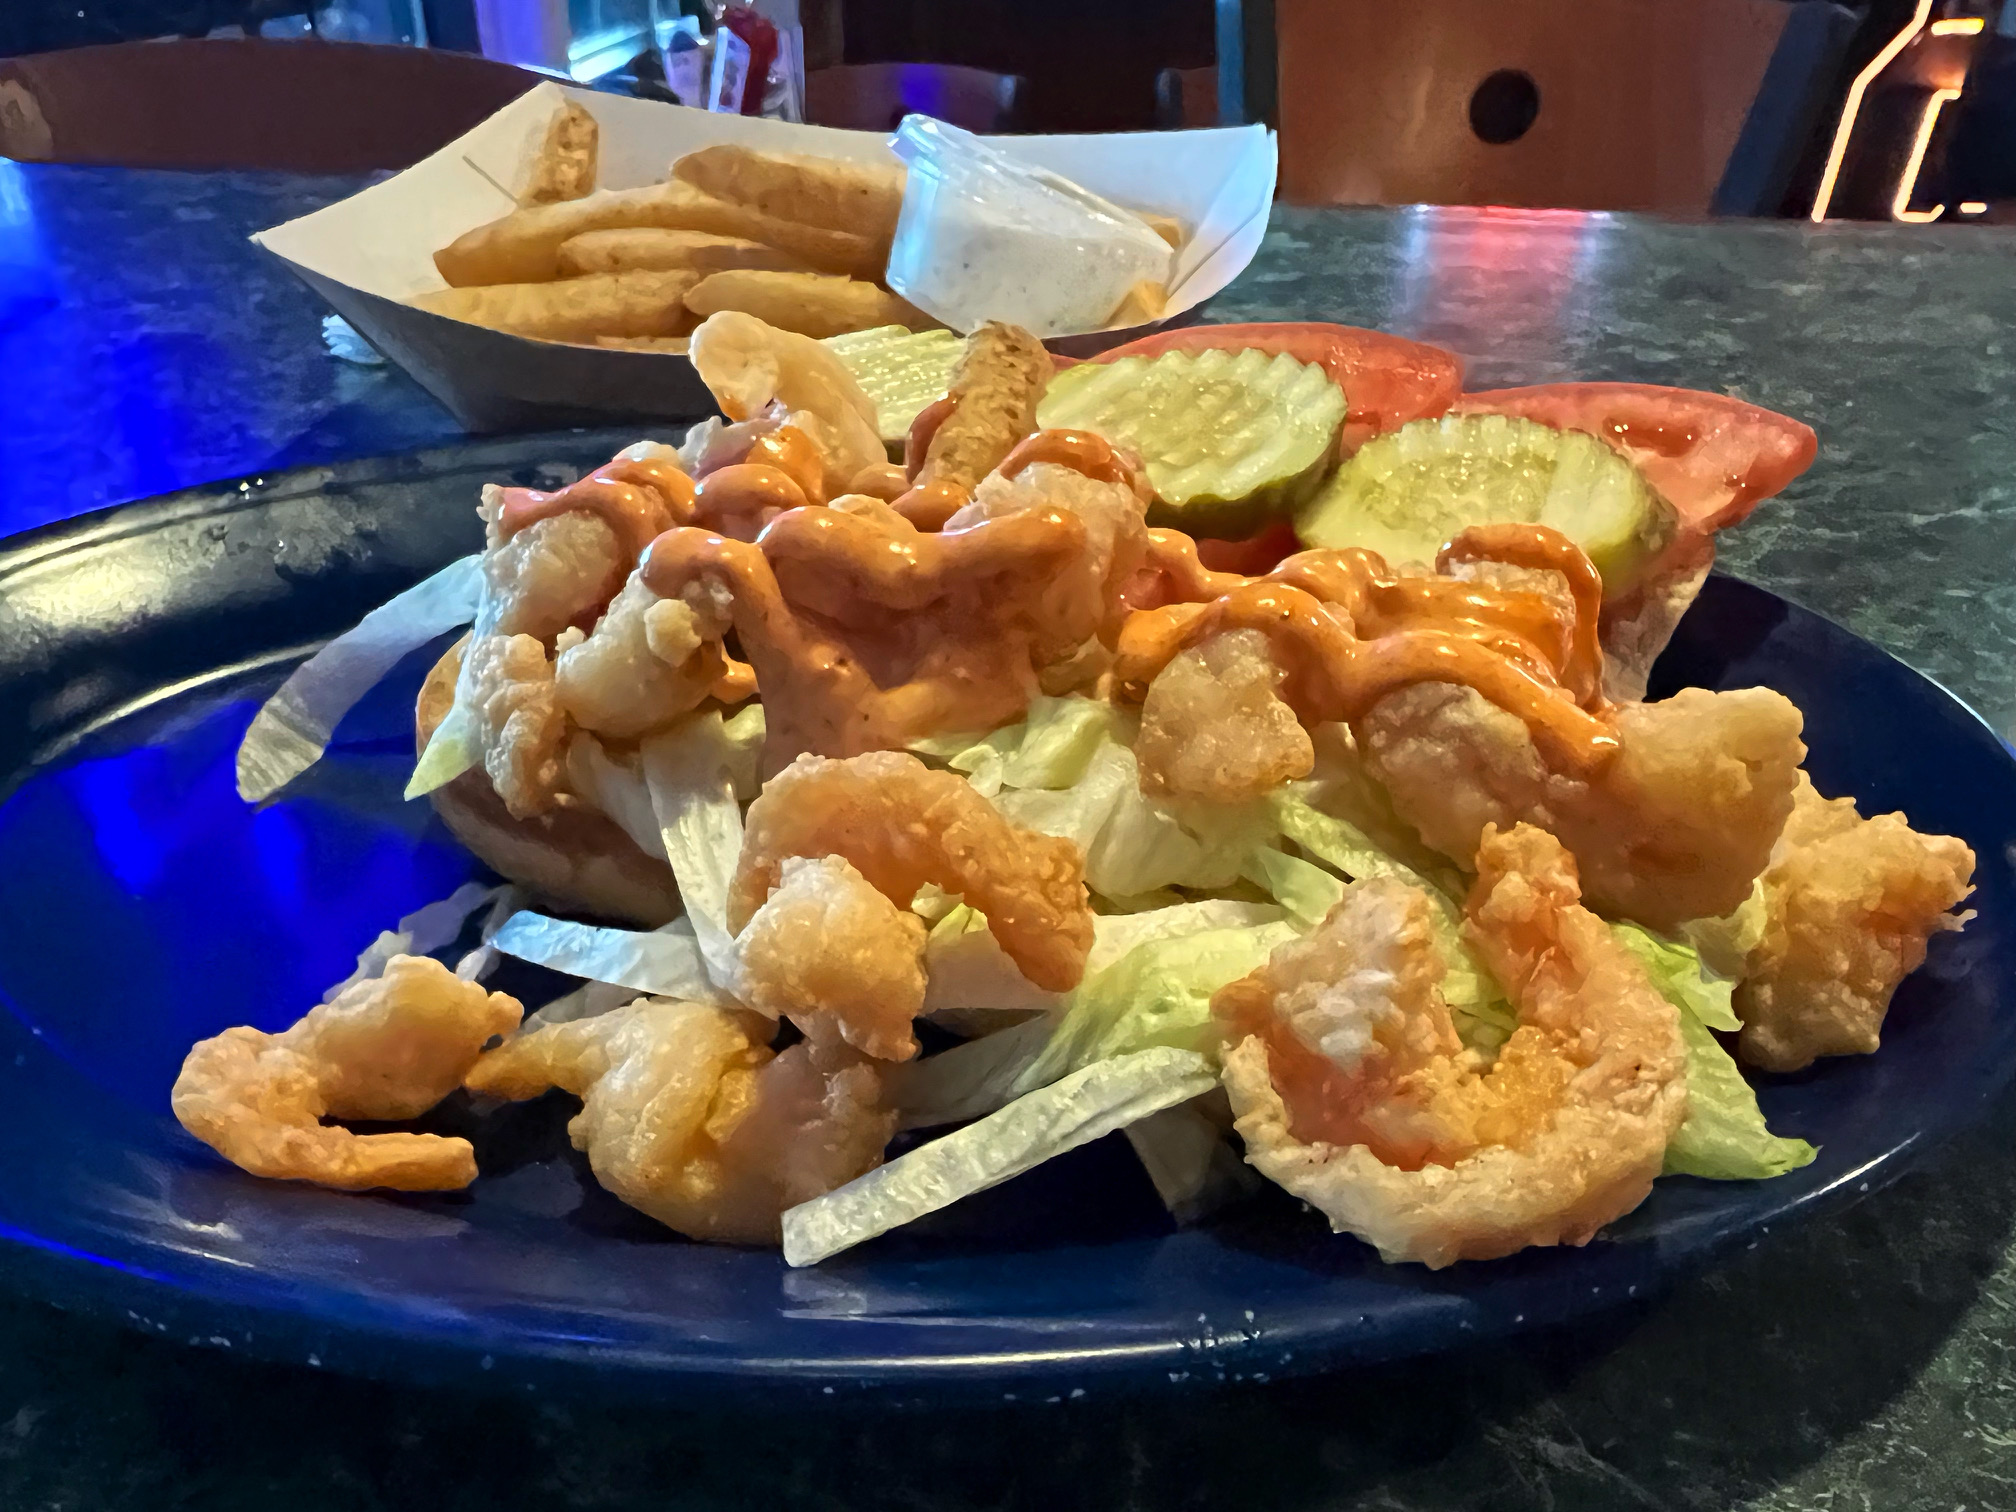 On a dark blue plate, there is a po boy with lots of shrimp and toppings. Some fried shrimp and shredded lettuce are on the plate, off of the sandwich. Photo by Alyssa Buckley.